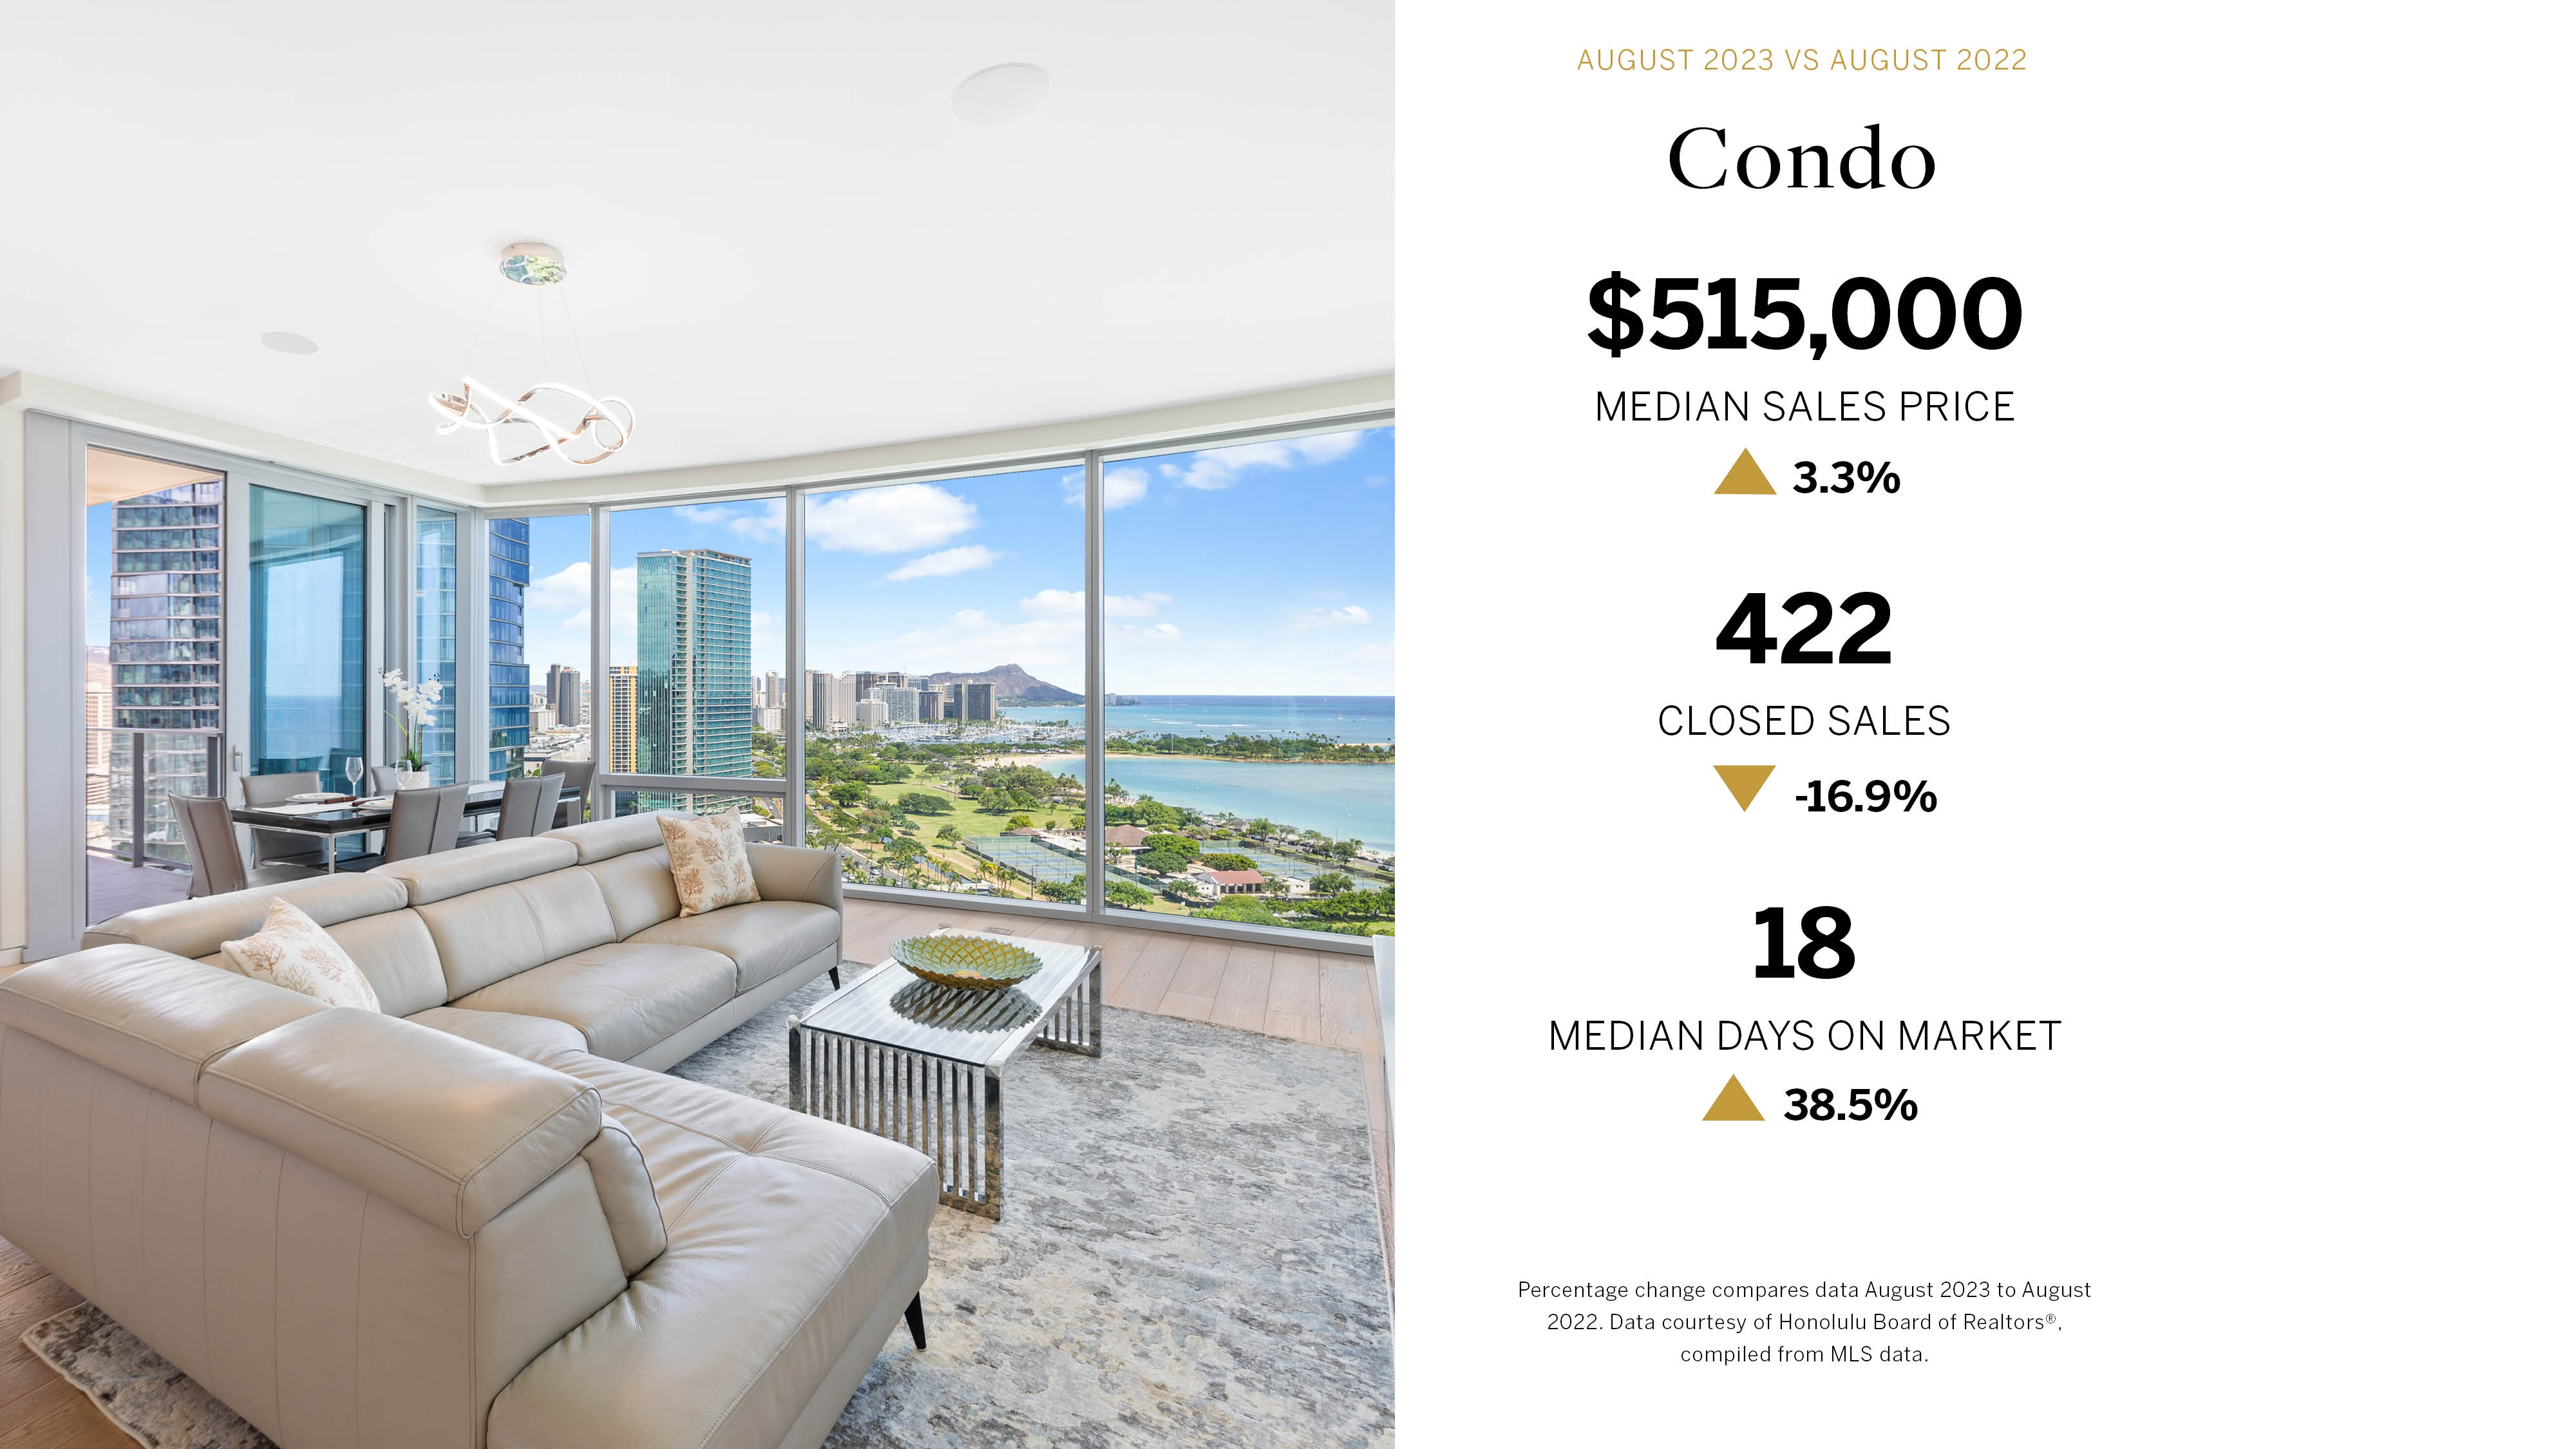 Oahu Real Estate Market Stats August 2023 - Condos 1